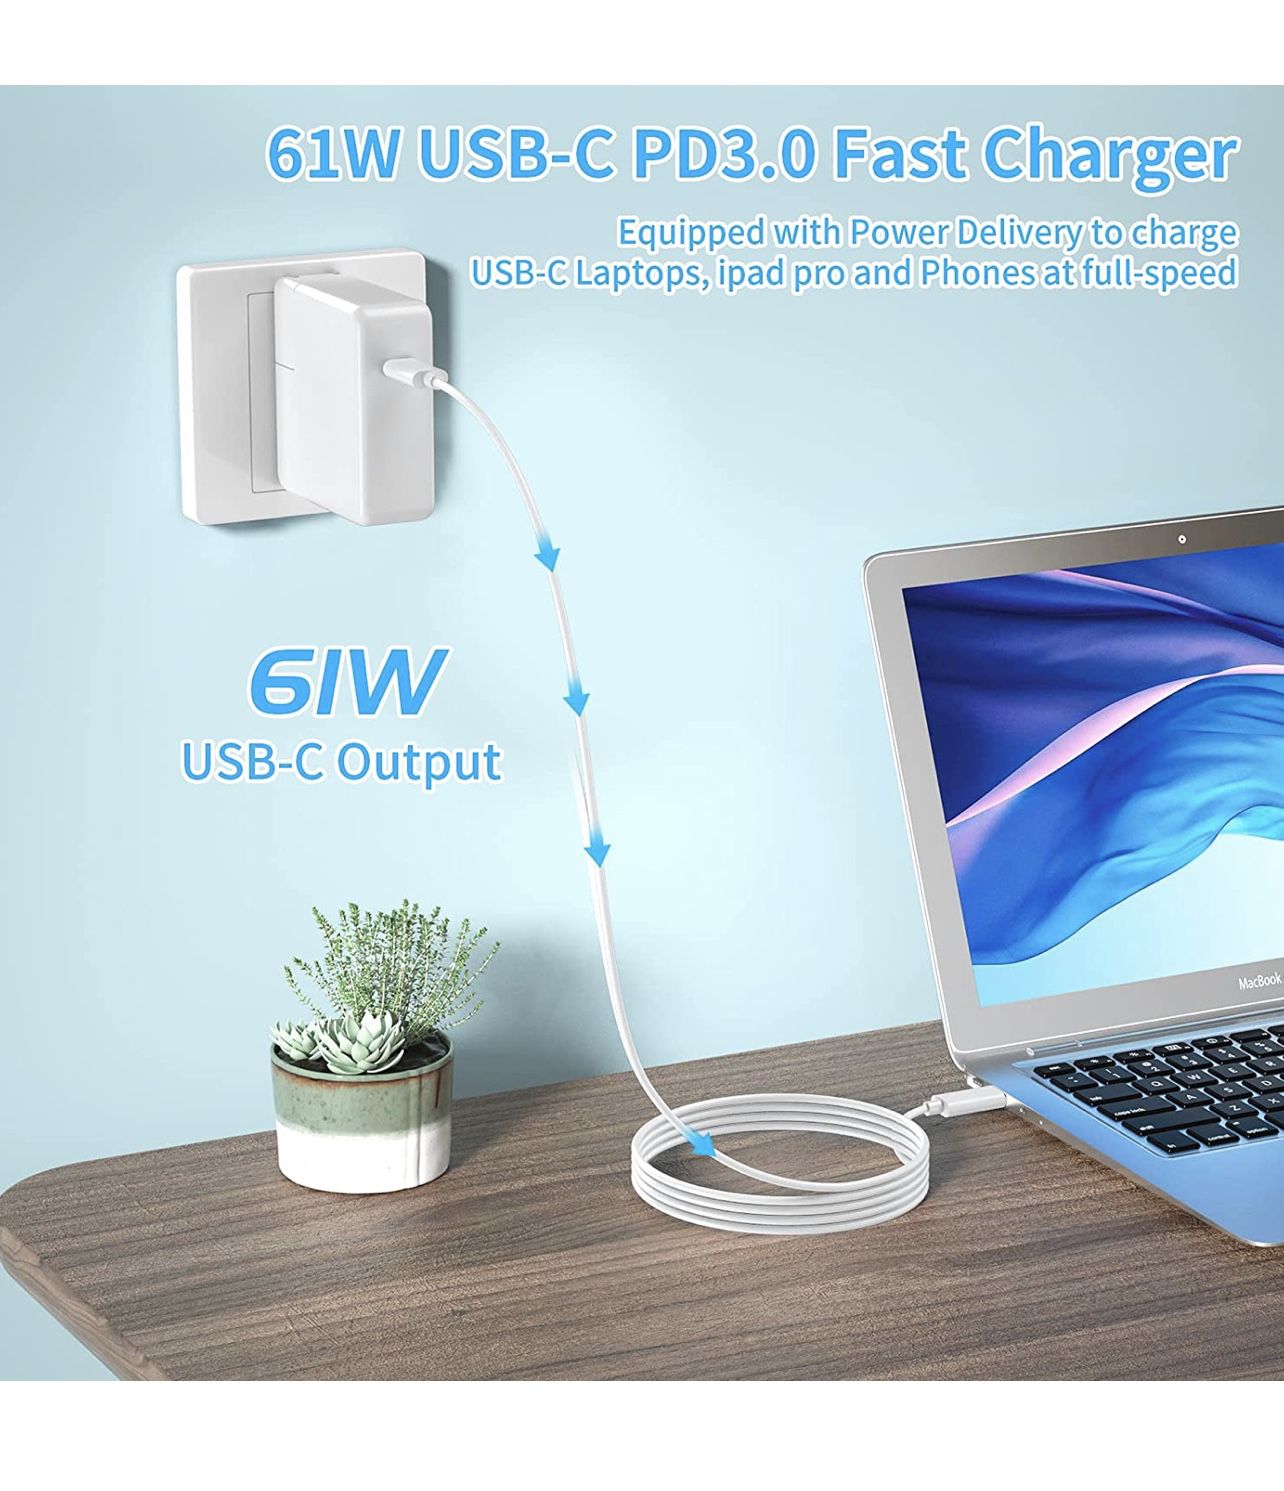 brand new 📦 factory Macbook fast Charger 61W ➕7.2 feet USB C cable 💰 original $30